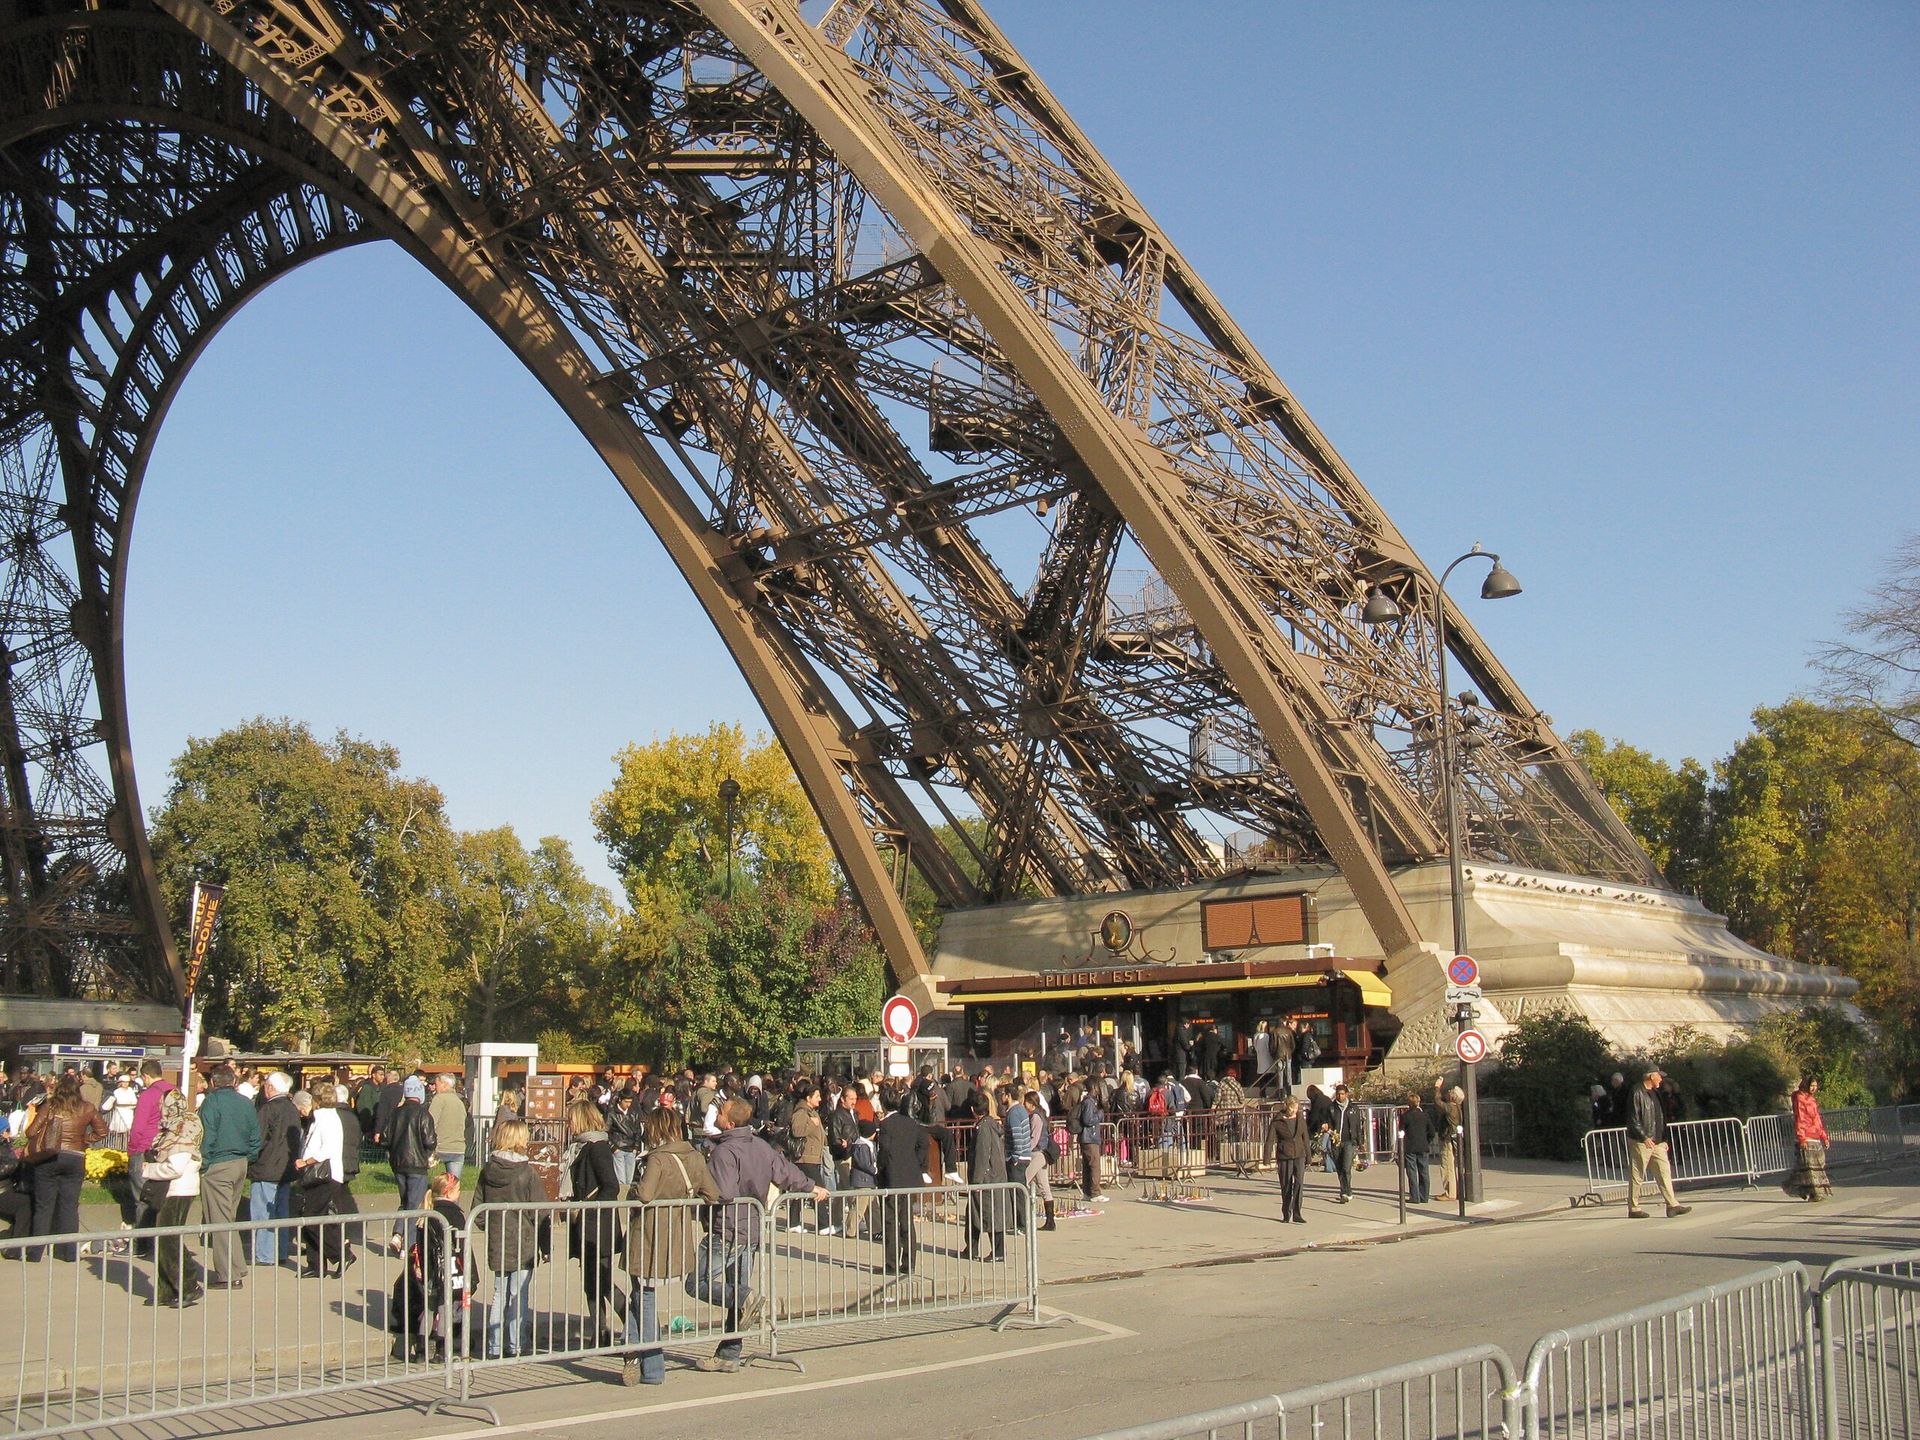 World's most visited monument with an entrance fee: The Eiffel Tower